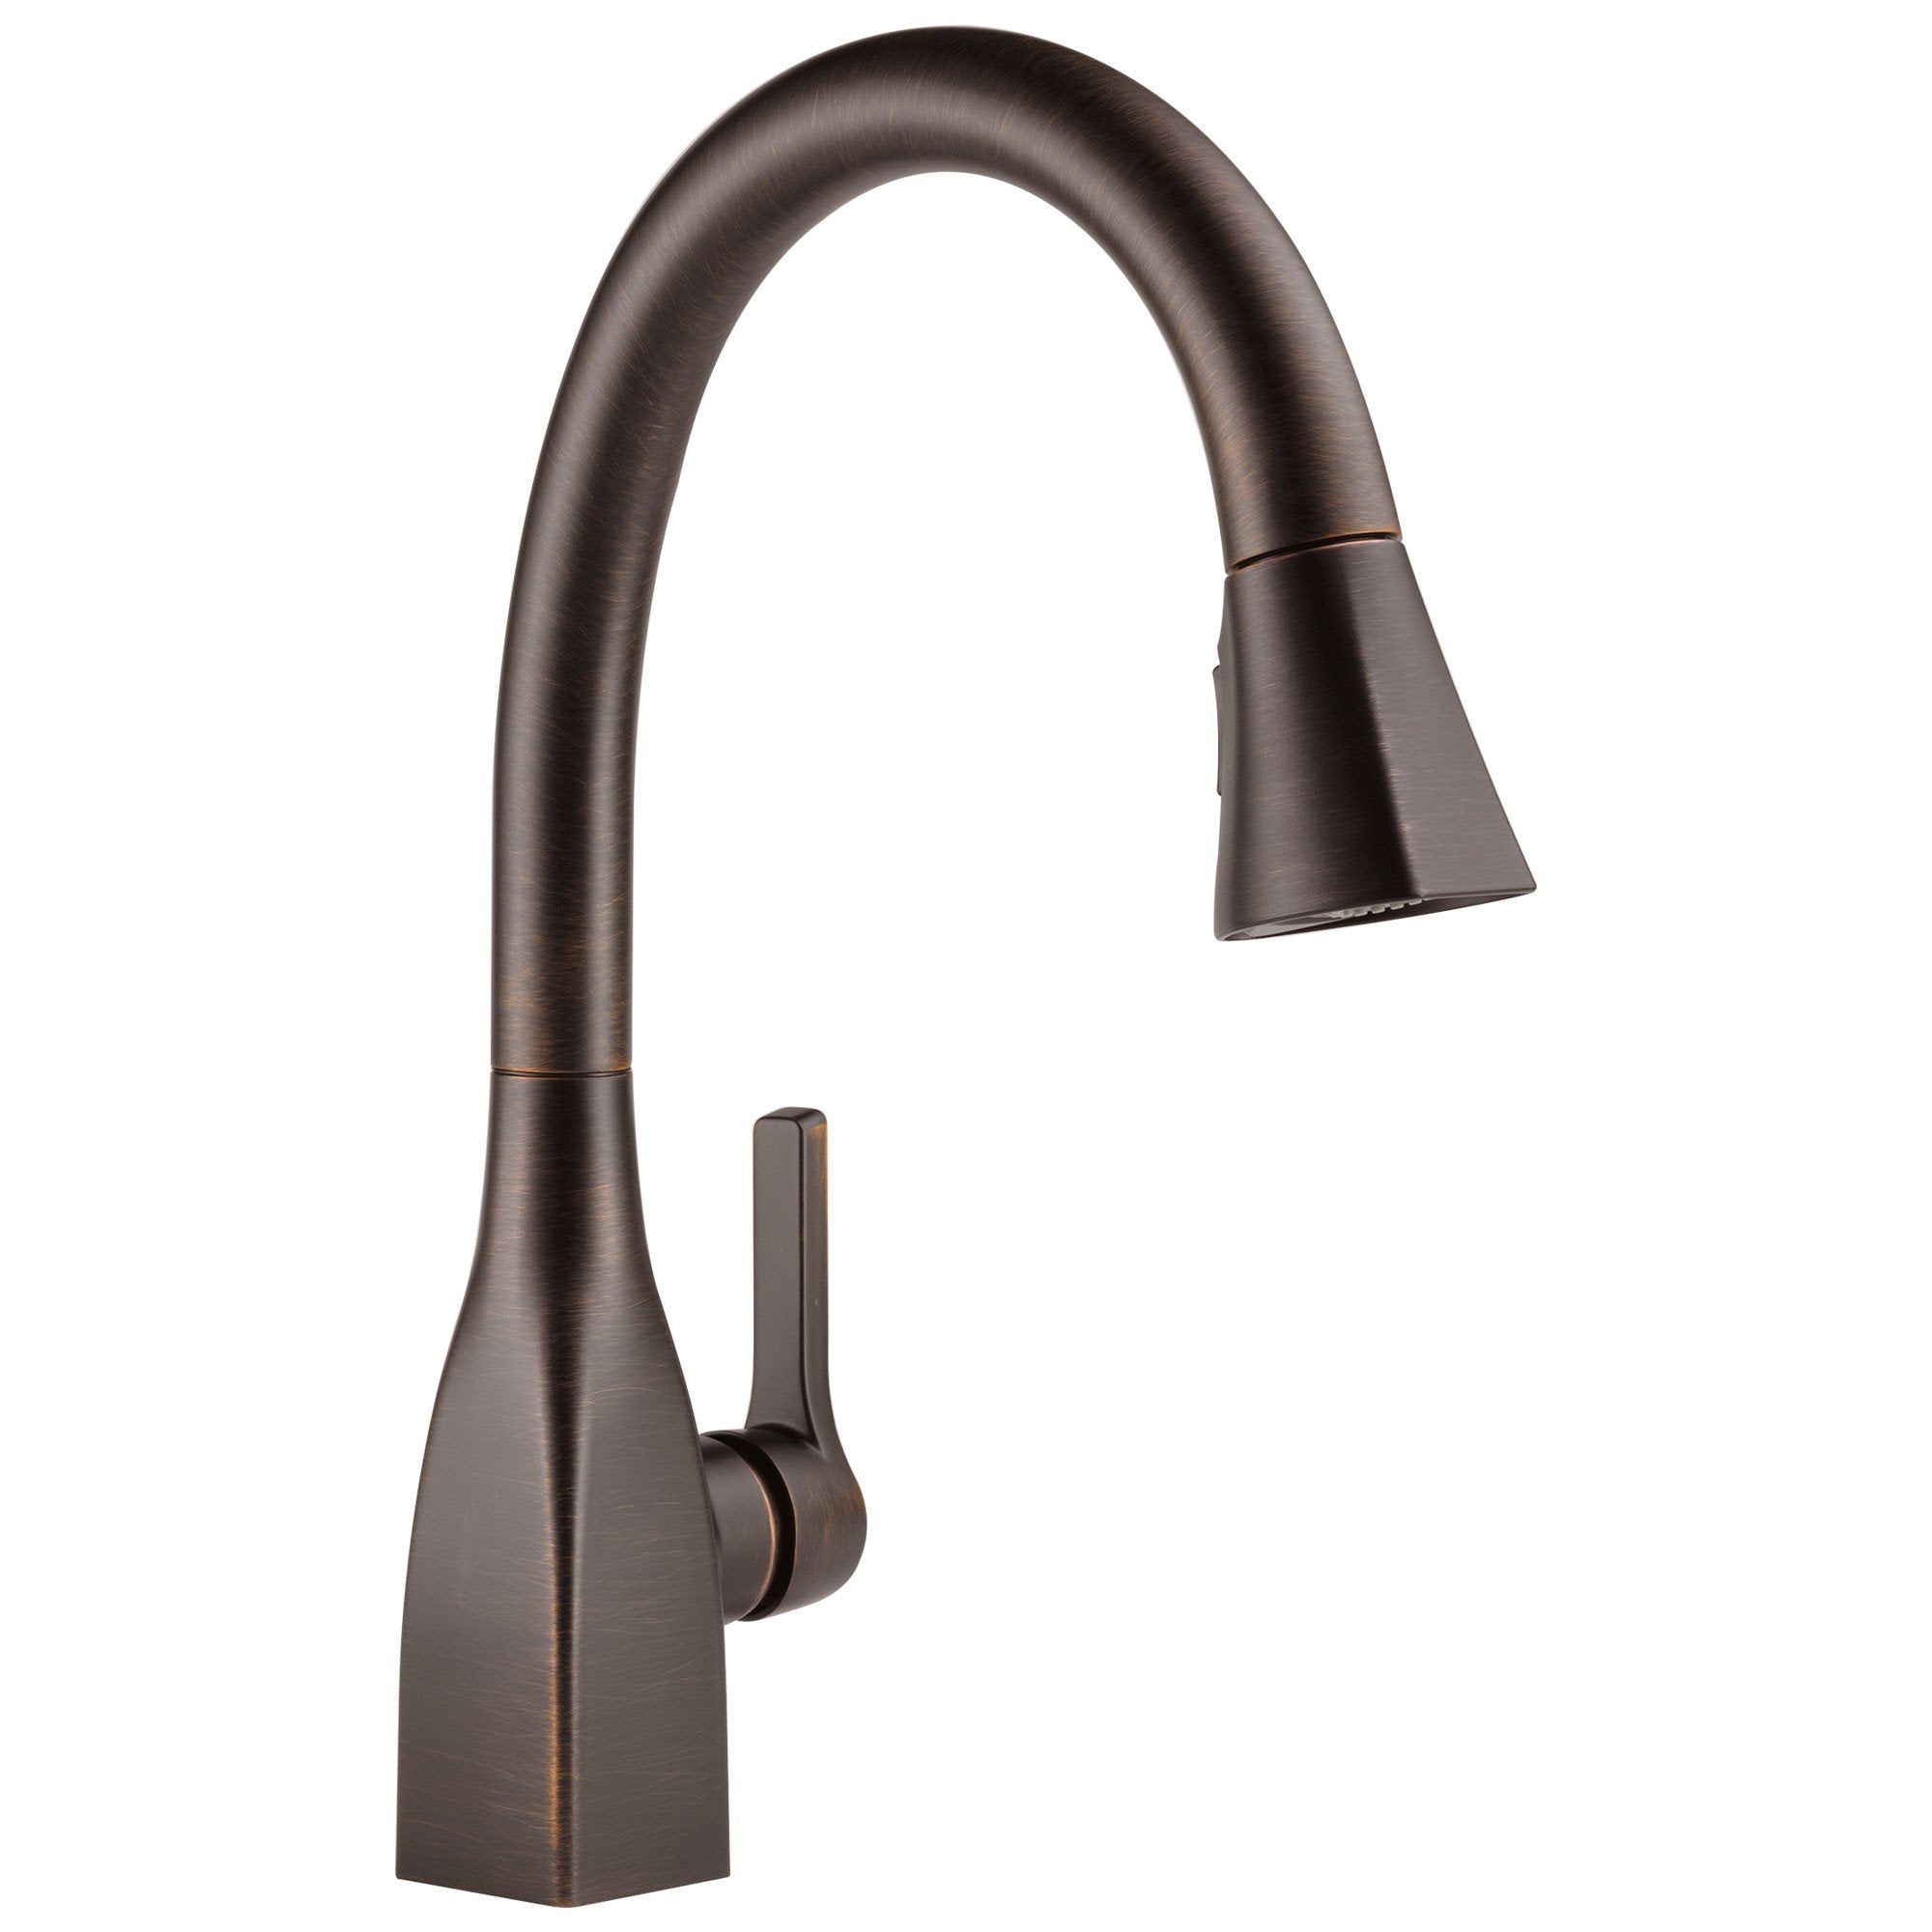 Delta Mateo Collection Venetian Bronze Finish Modern Single Lever Handle Pull-Down Kitchen Sink Faucet 726273